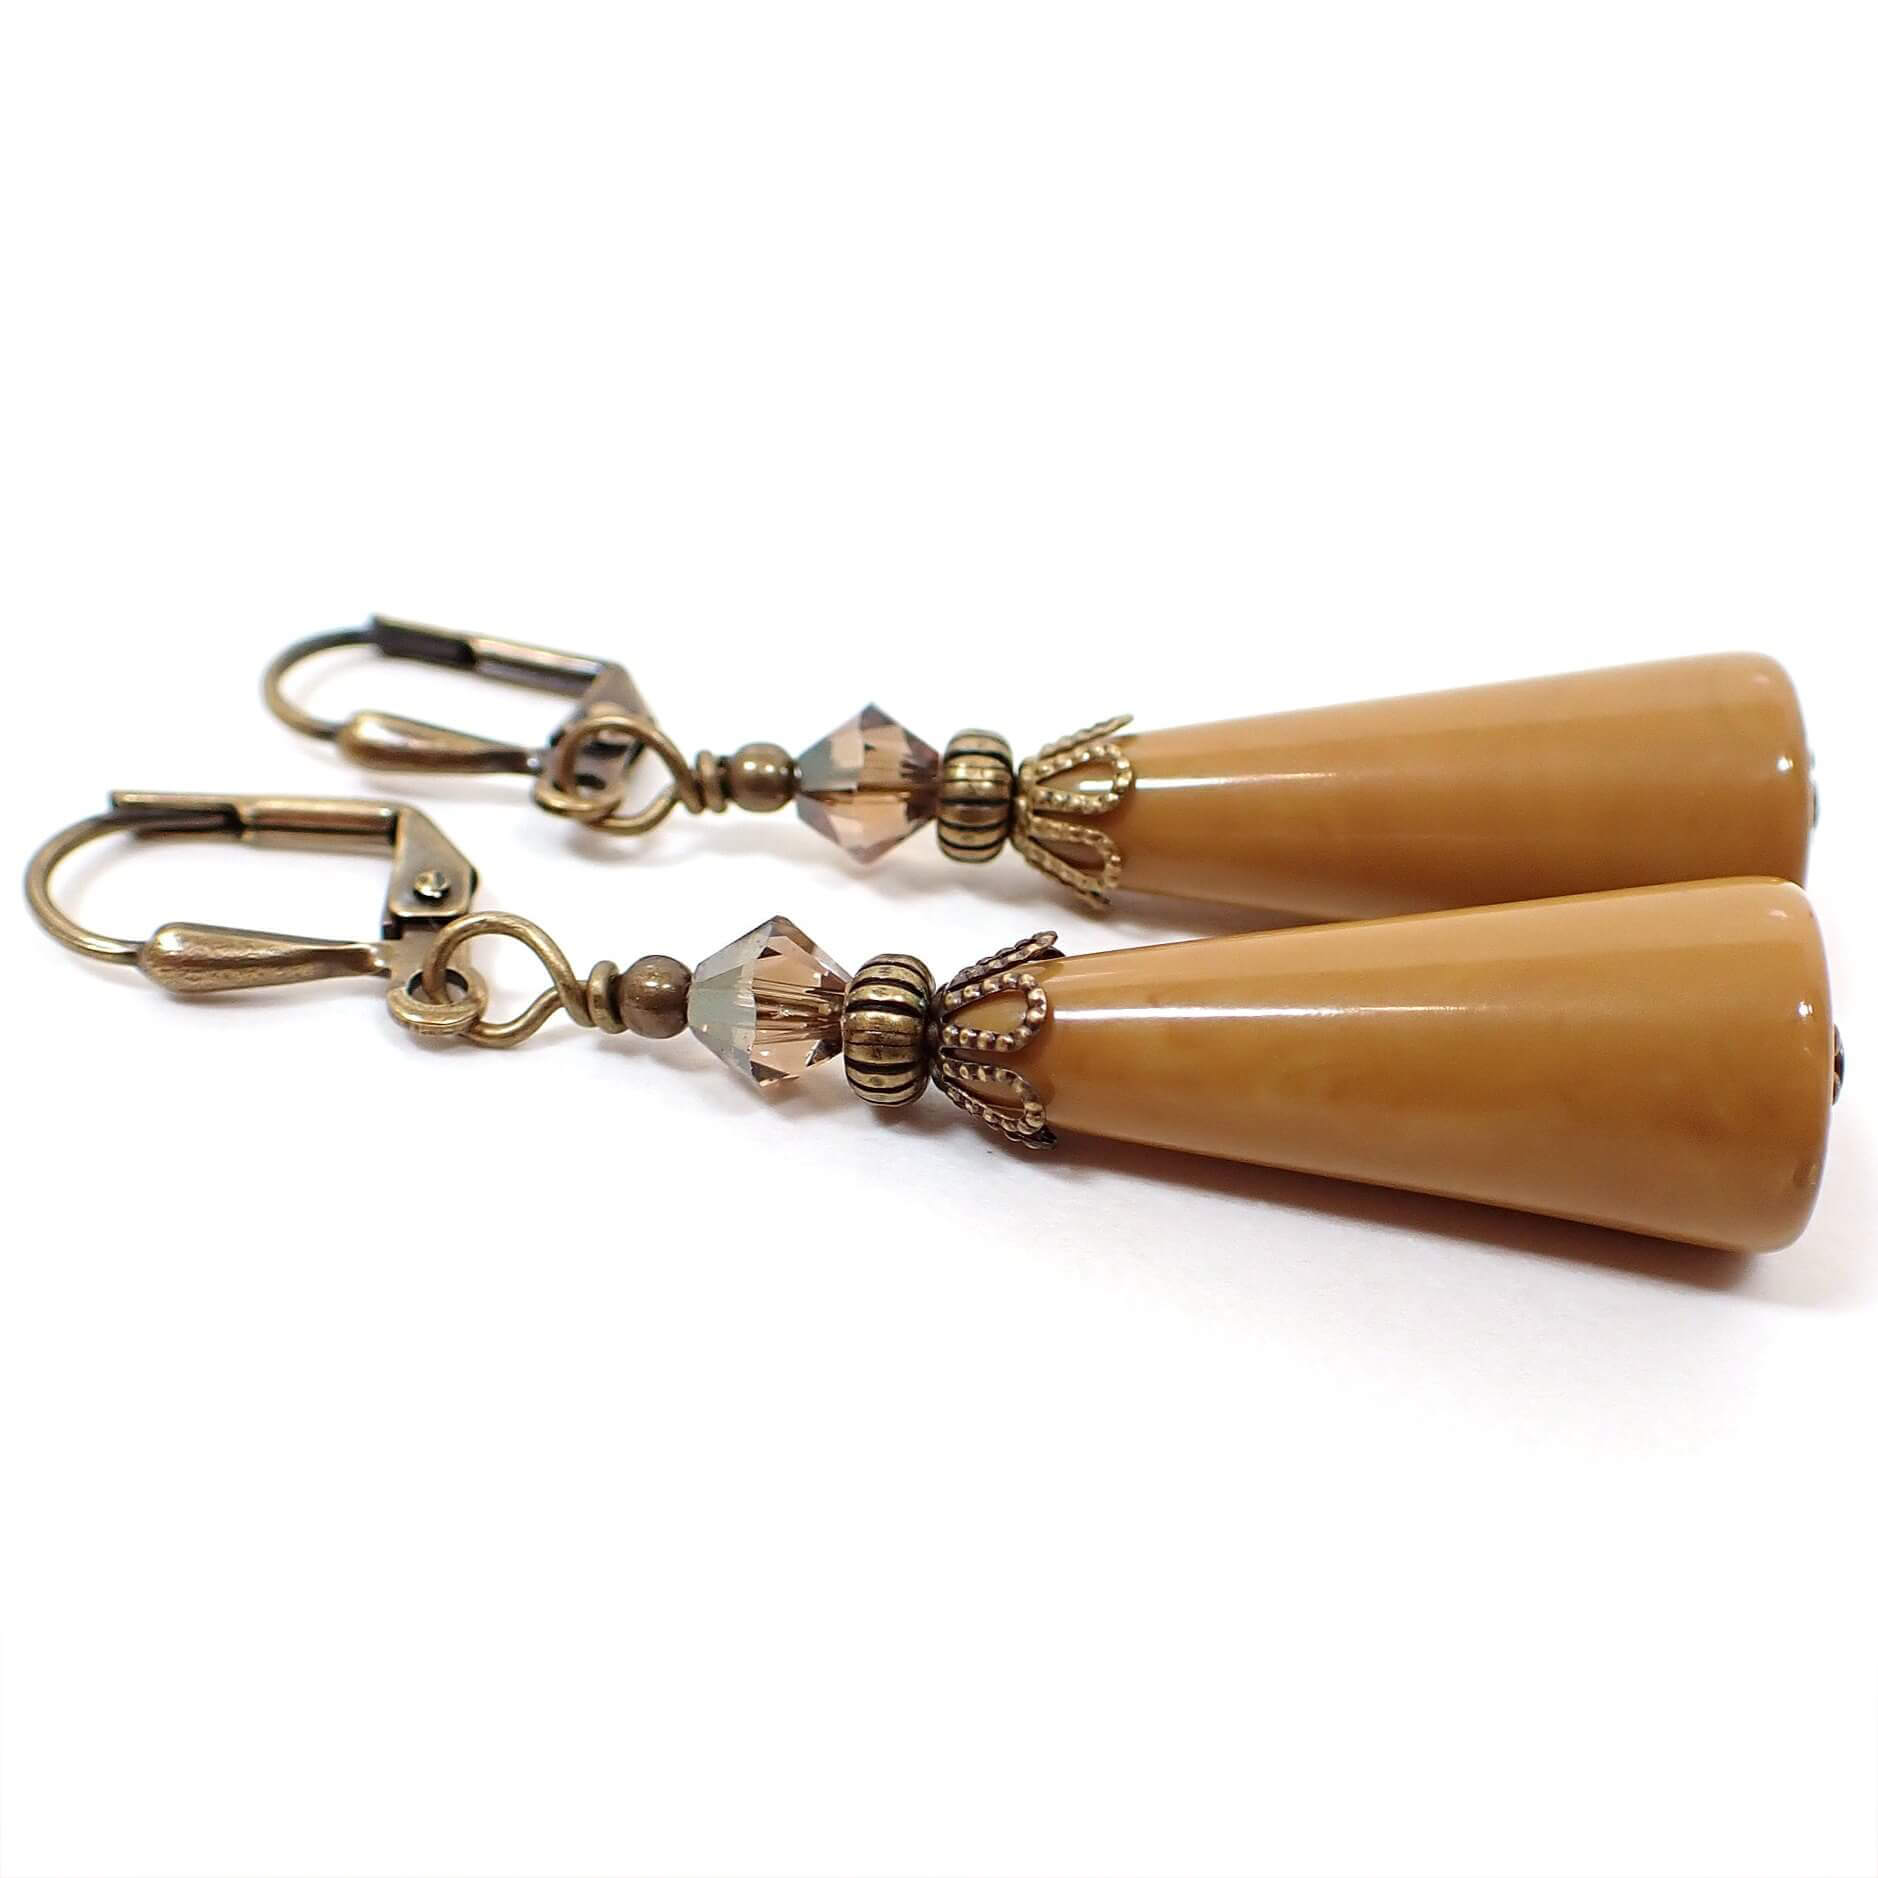 Side view of the handmade cone earrings. The metal is antiqued brass in color. There are faceted brown bicone beads at the top and cone shaped lucite beads at the bottom in a light brown color.